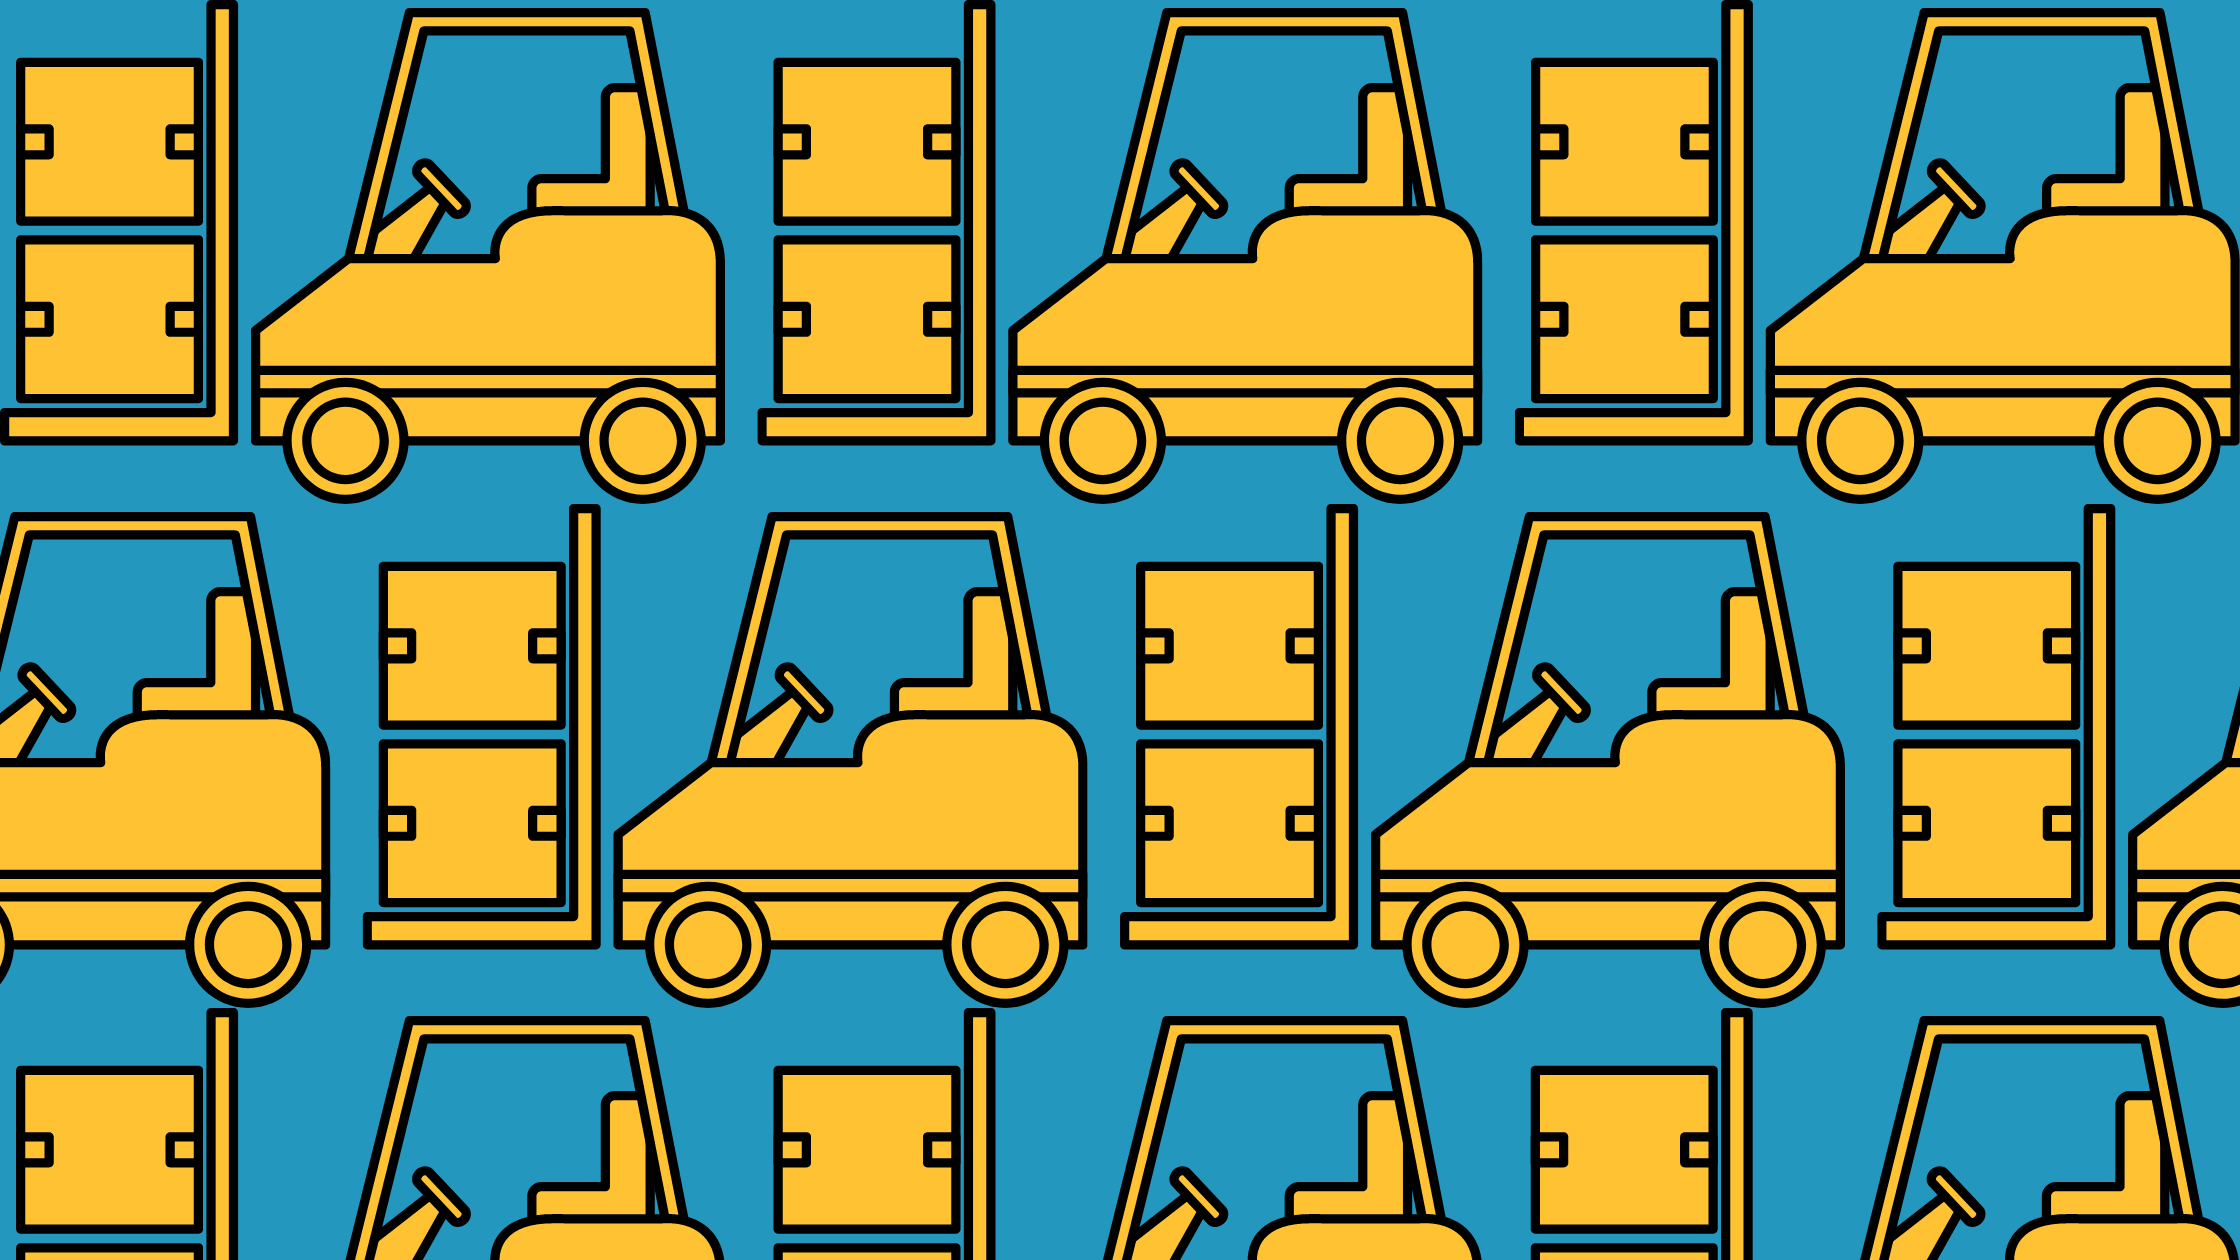 A repeating pattern of forklifts